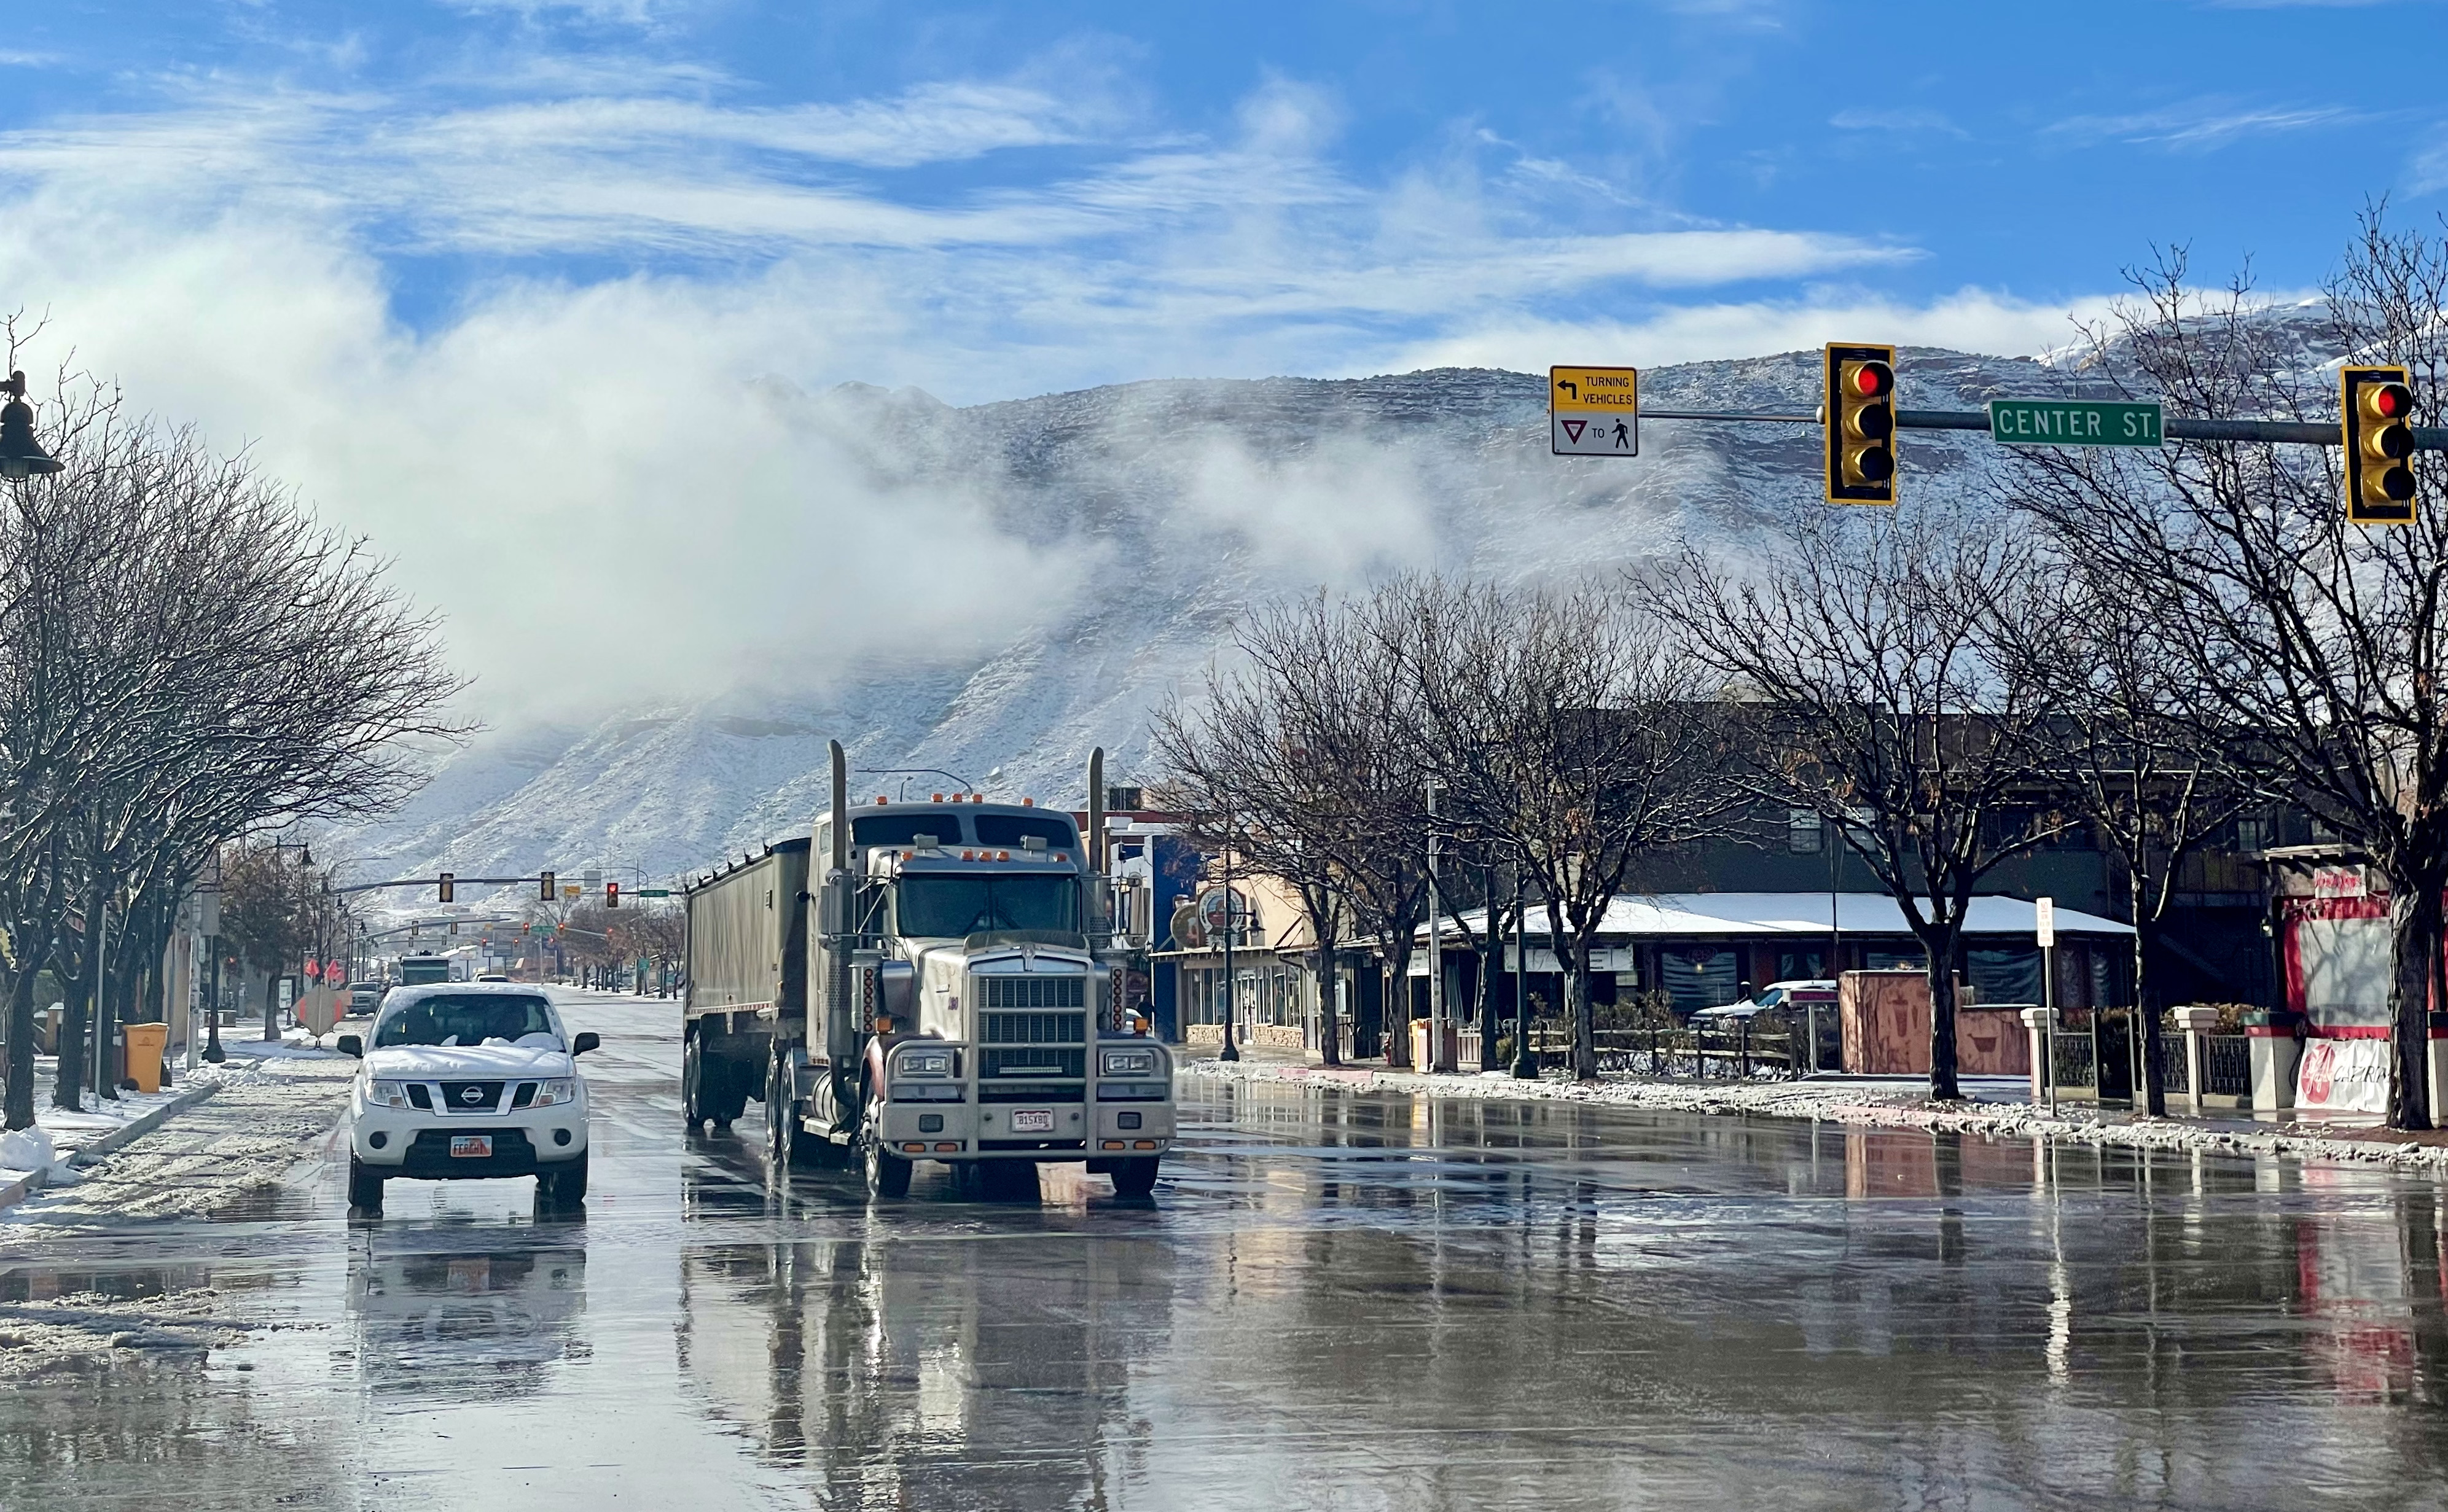 Traffic stops at a red light at a wet intersection; cloud-like haze sits above the trees in the background as the sun shines, melting snow on the ground